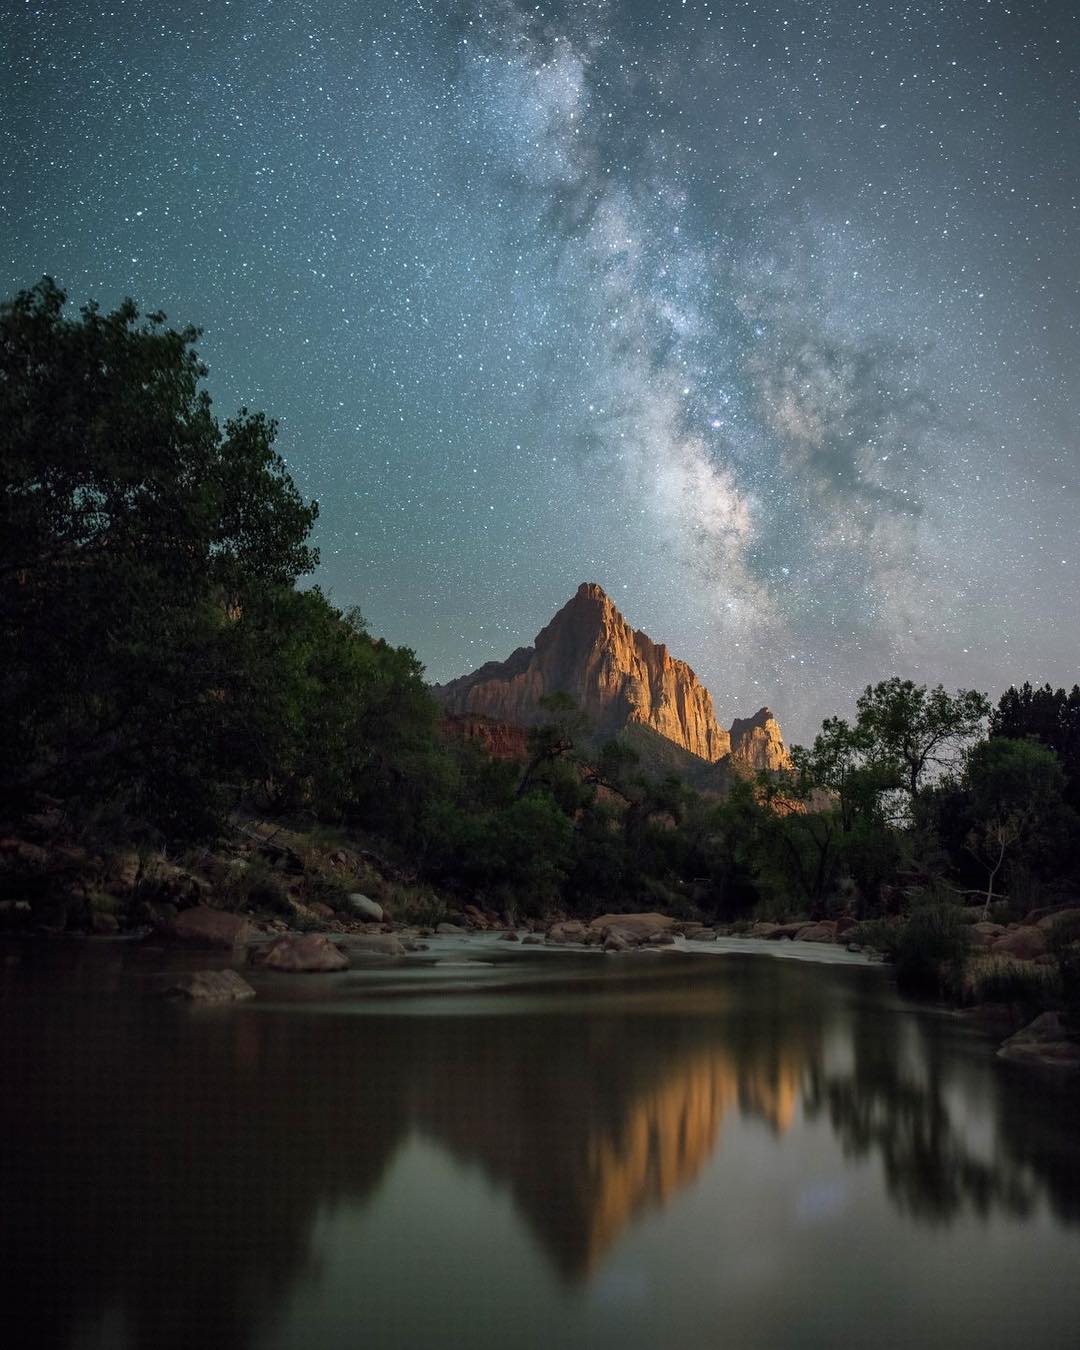 Zion Night Photo with the Watchman and Milkyway Reflection